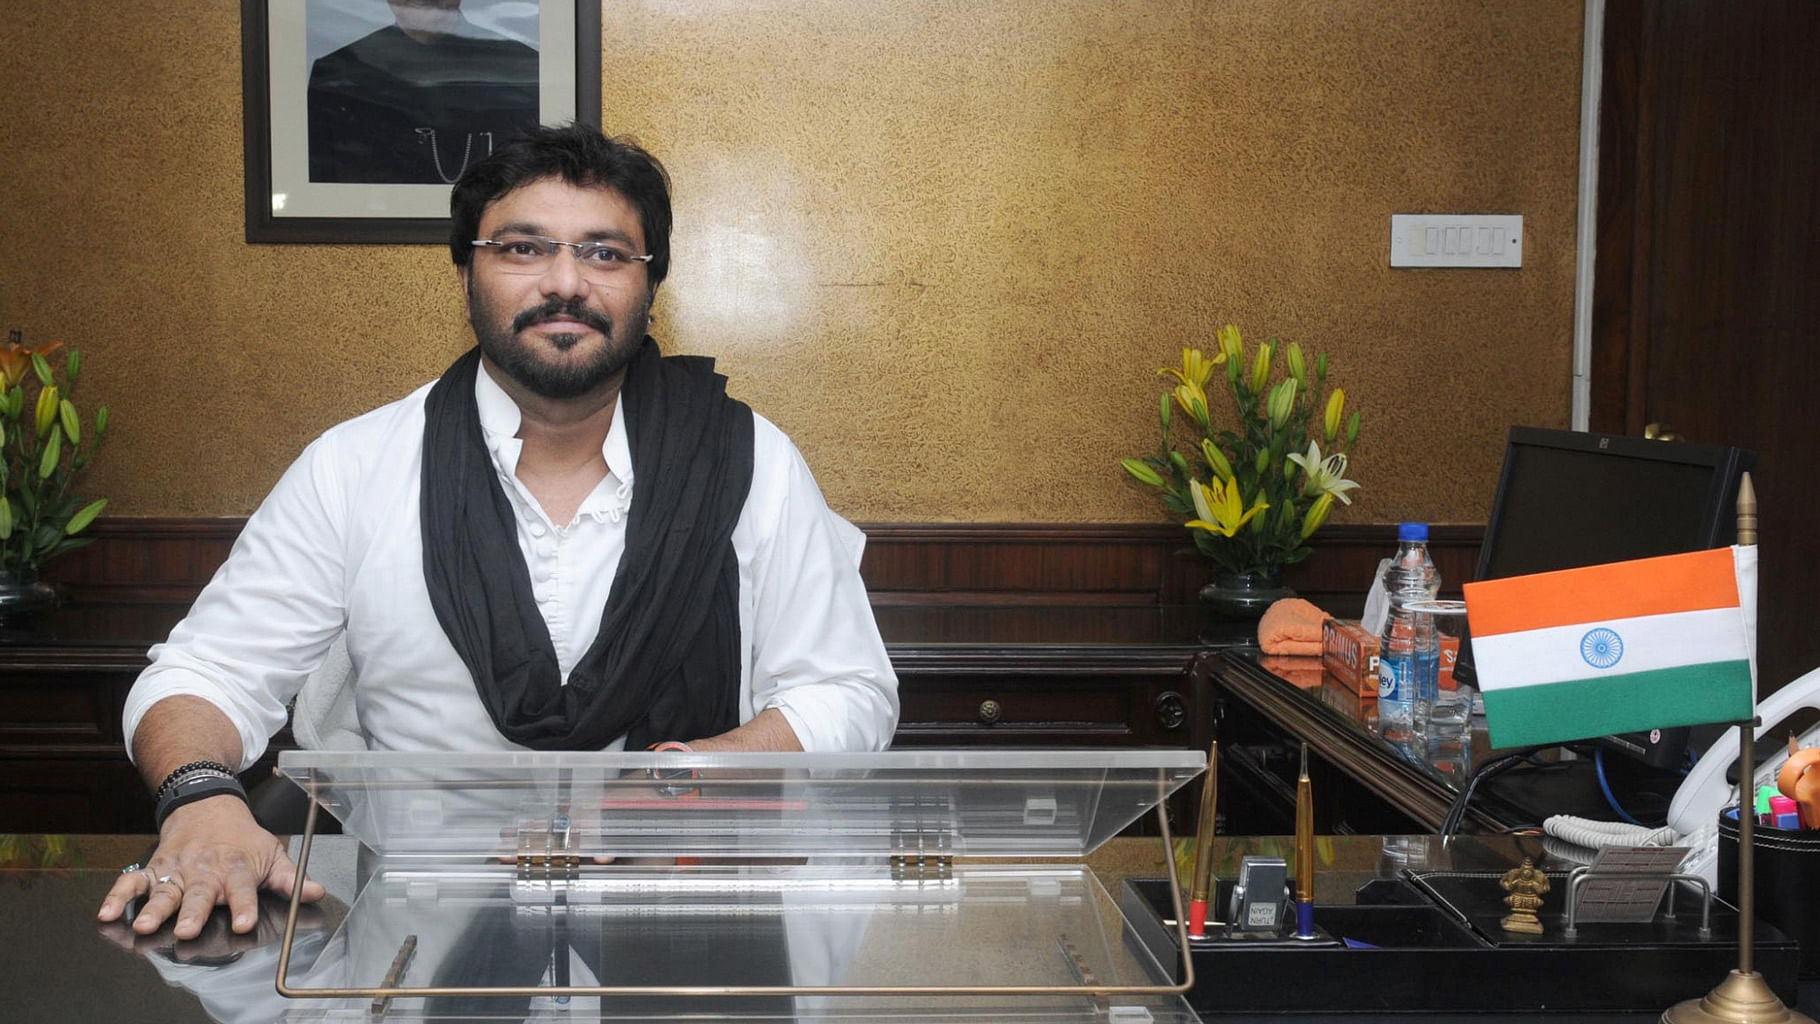 Singer-turned-politician Babul Supriyo said Bongo is an instrument that is played, and therefore cannot be used as the state’s name. (Photo: IANS)